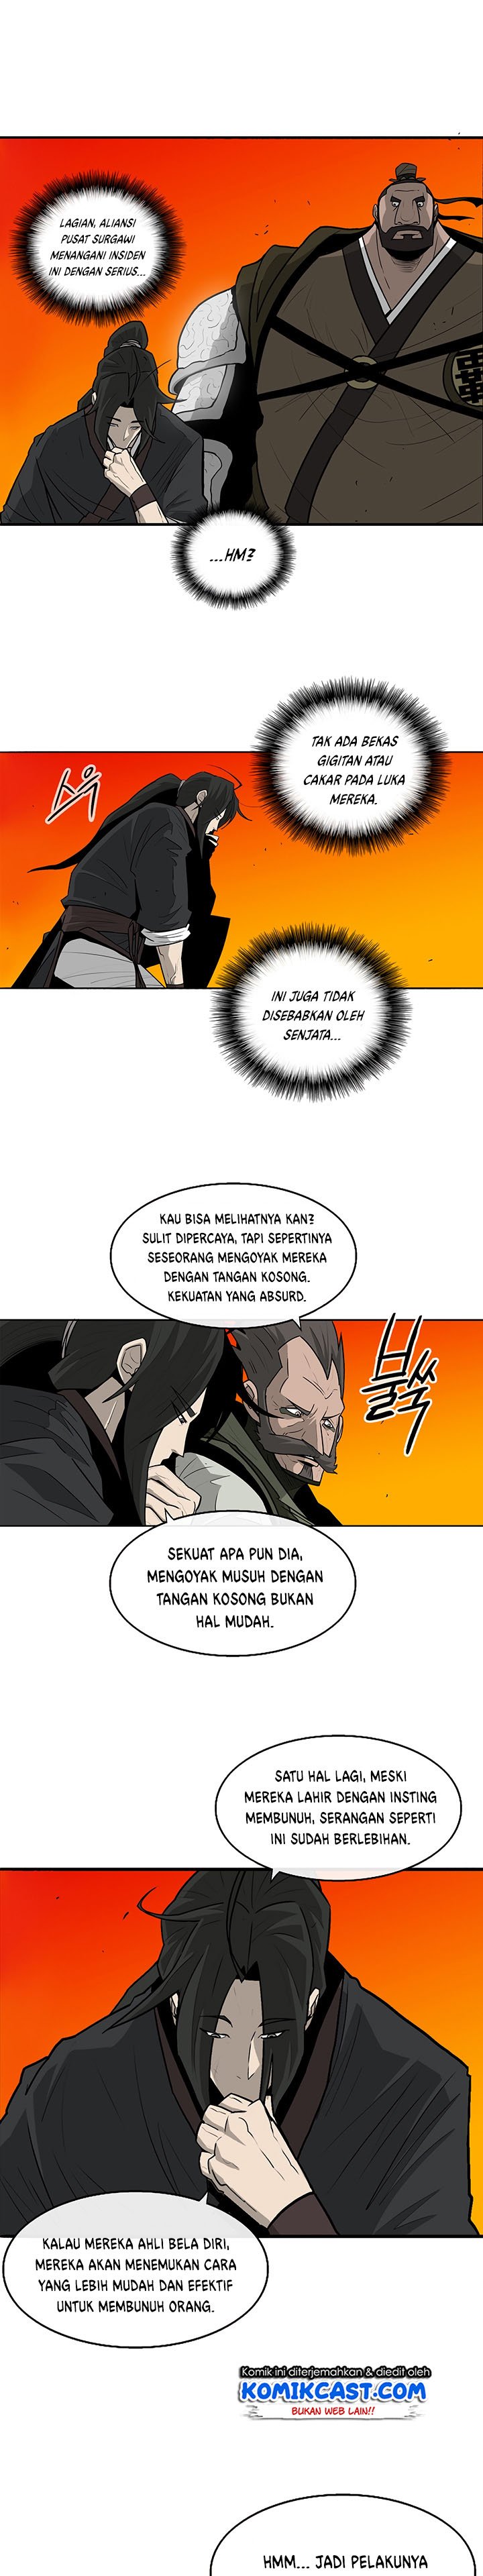 Legend of the Northern Blade Chapter 39